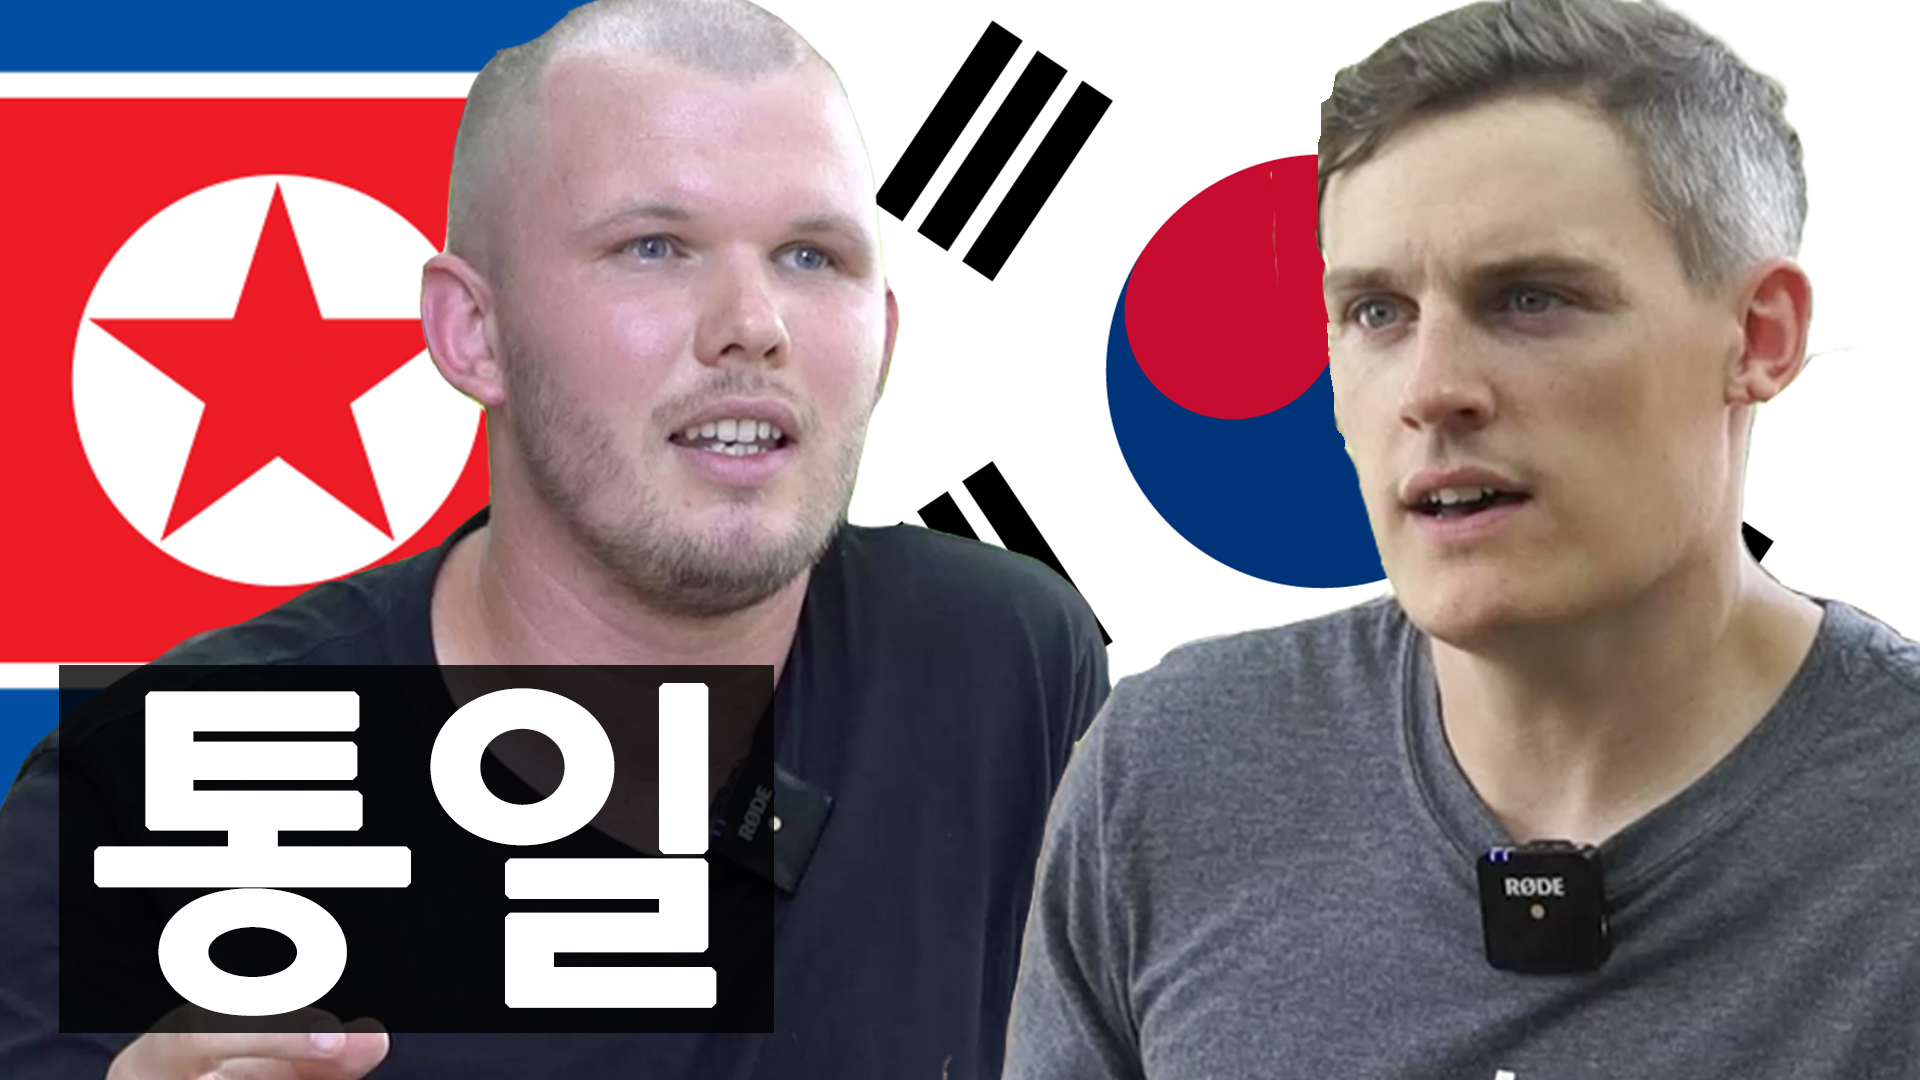 [National Institute for Unification Education X Dan&Joel] What do foreigners in Korea think of unification? Gyodong Island edition!(Korean, English subtitles)